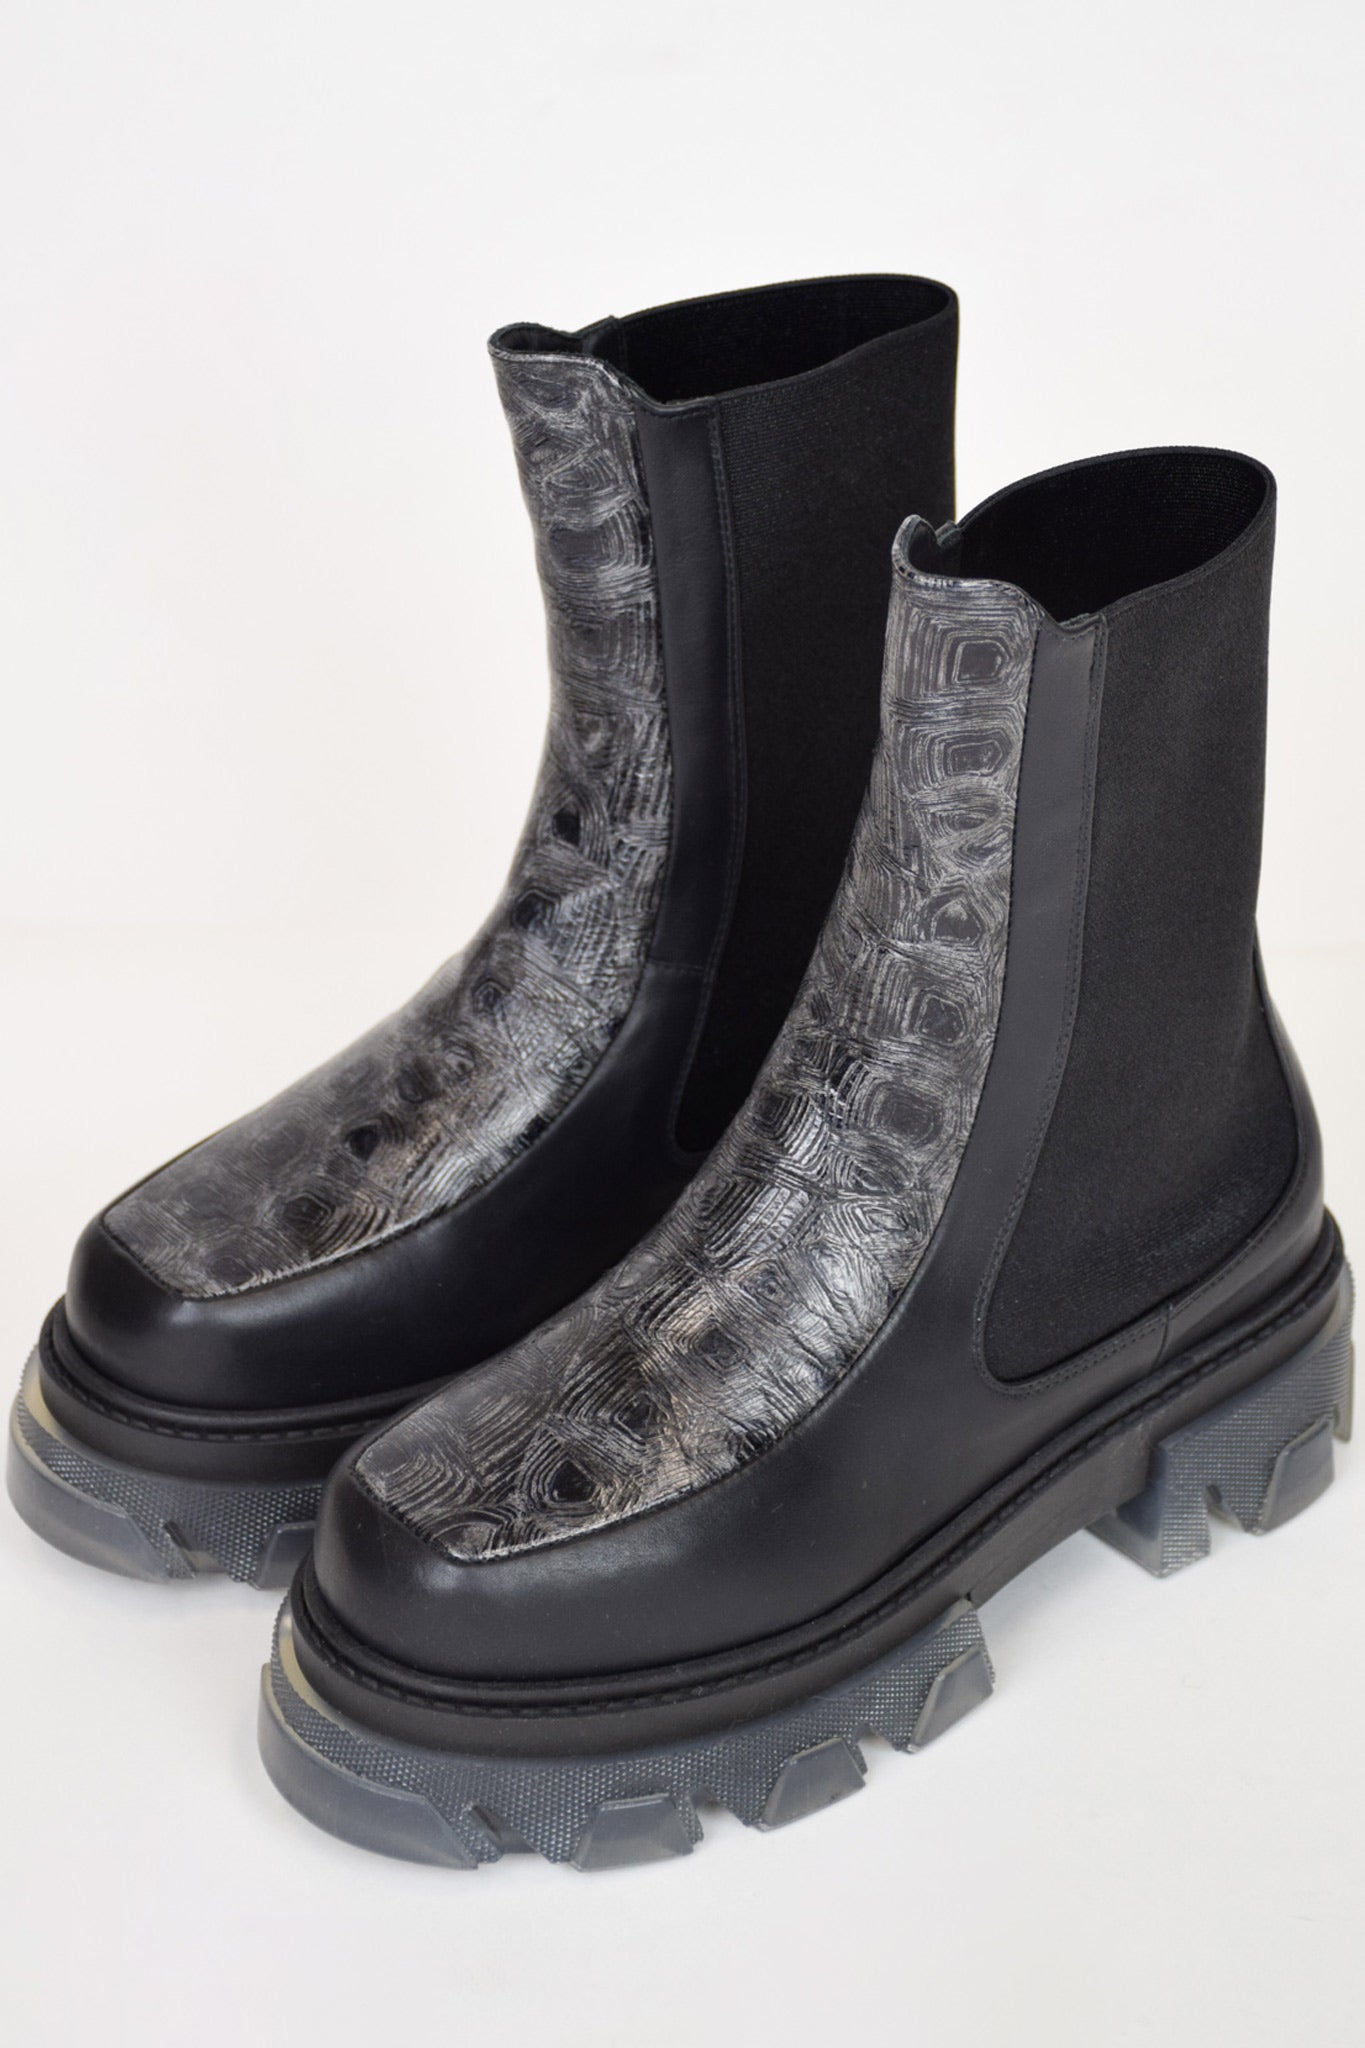 BOOTS WITH TURTLE PRINTED LEATHER